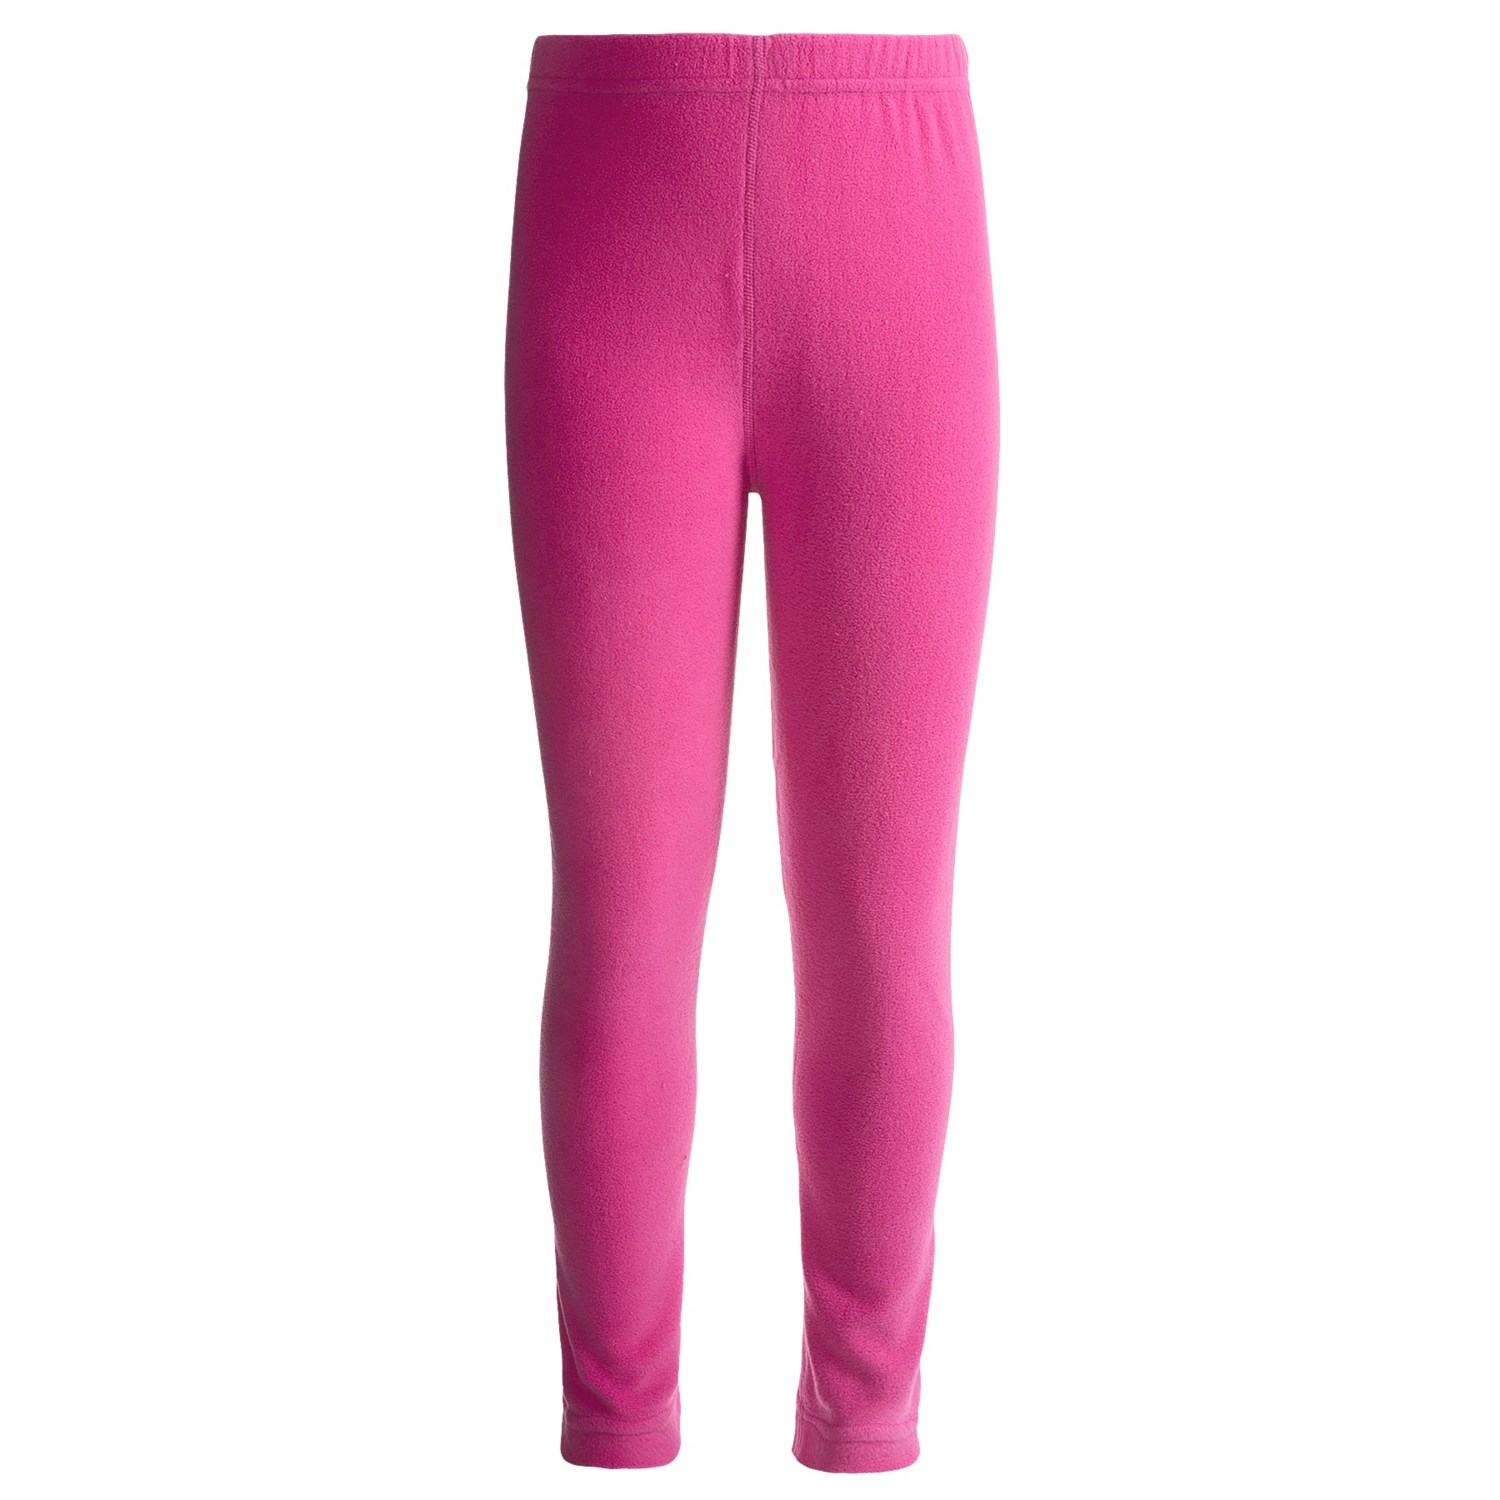 Watson's Brushed Microfleece Base Layer Bottoms (For Girls) - Save 50%